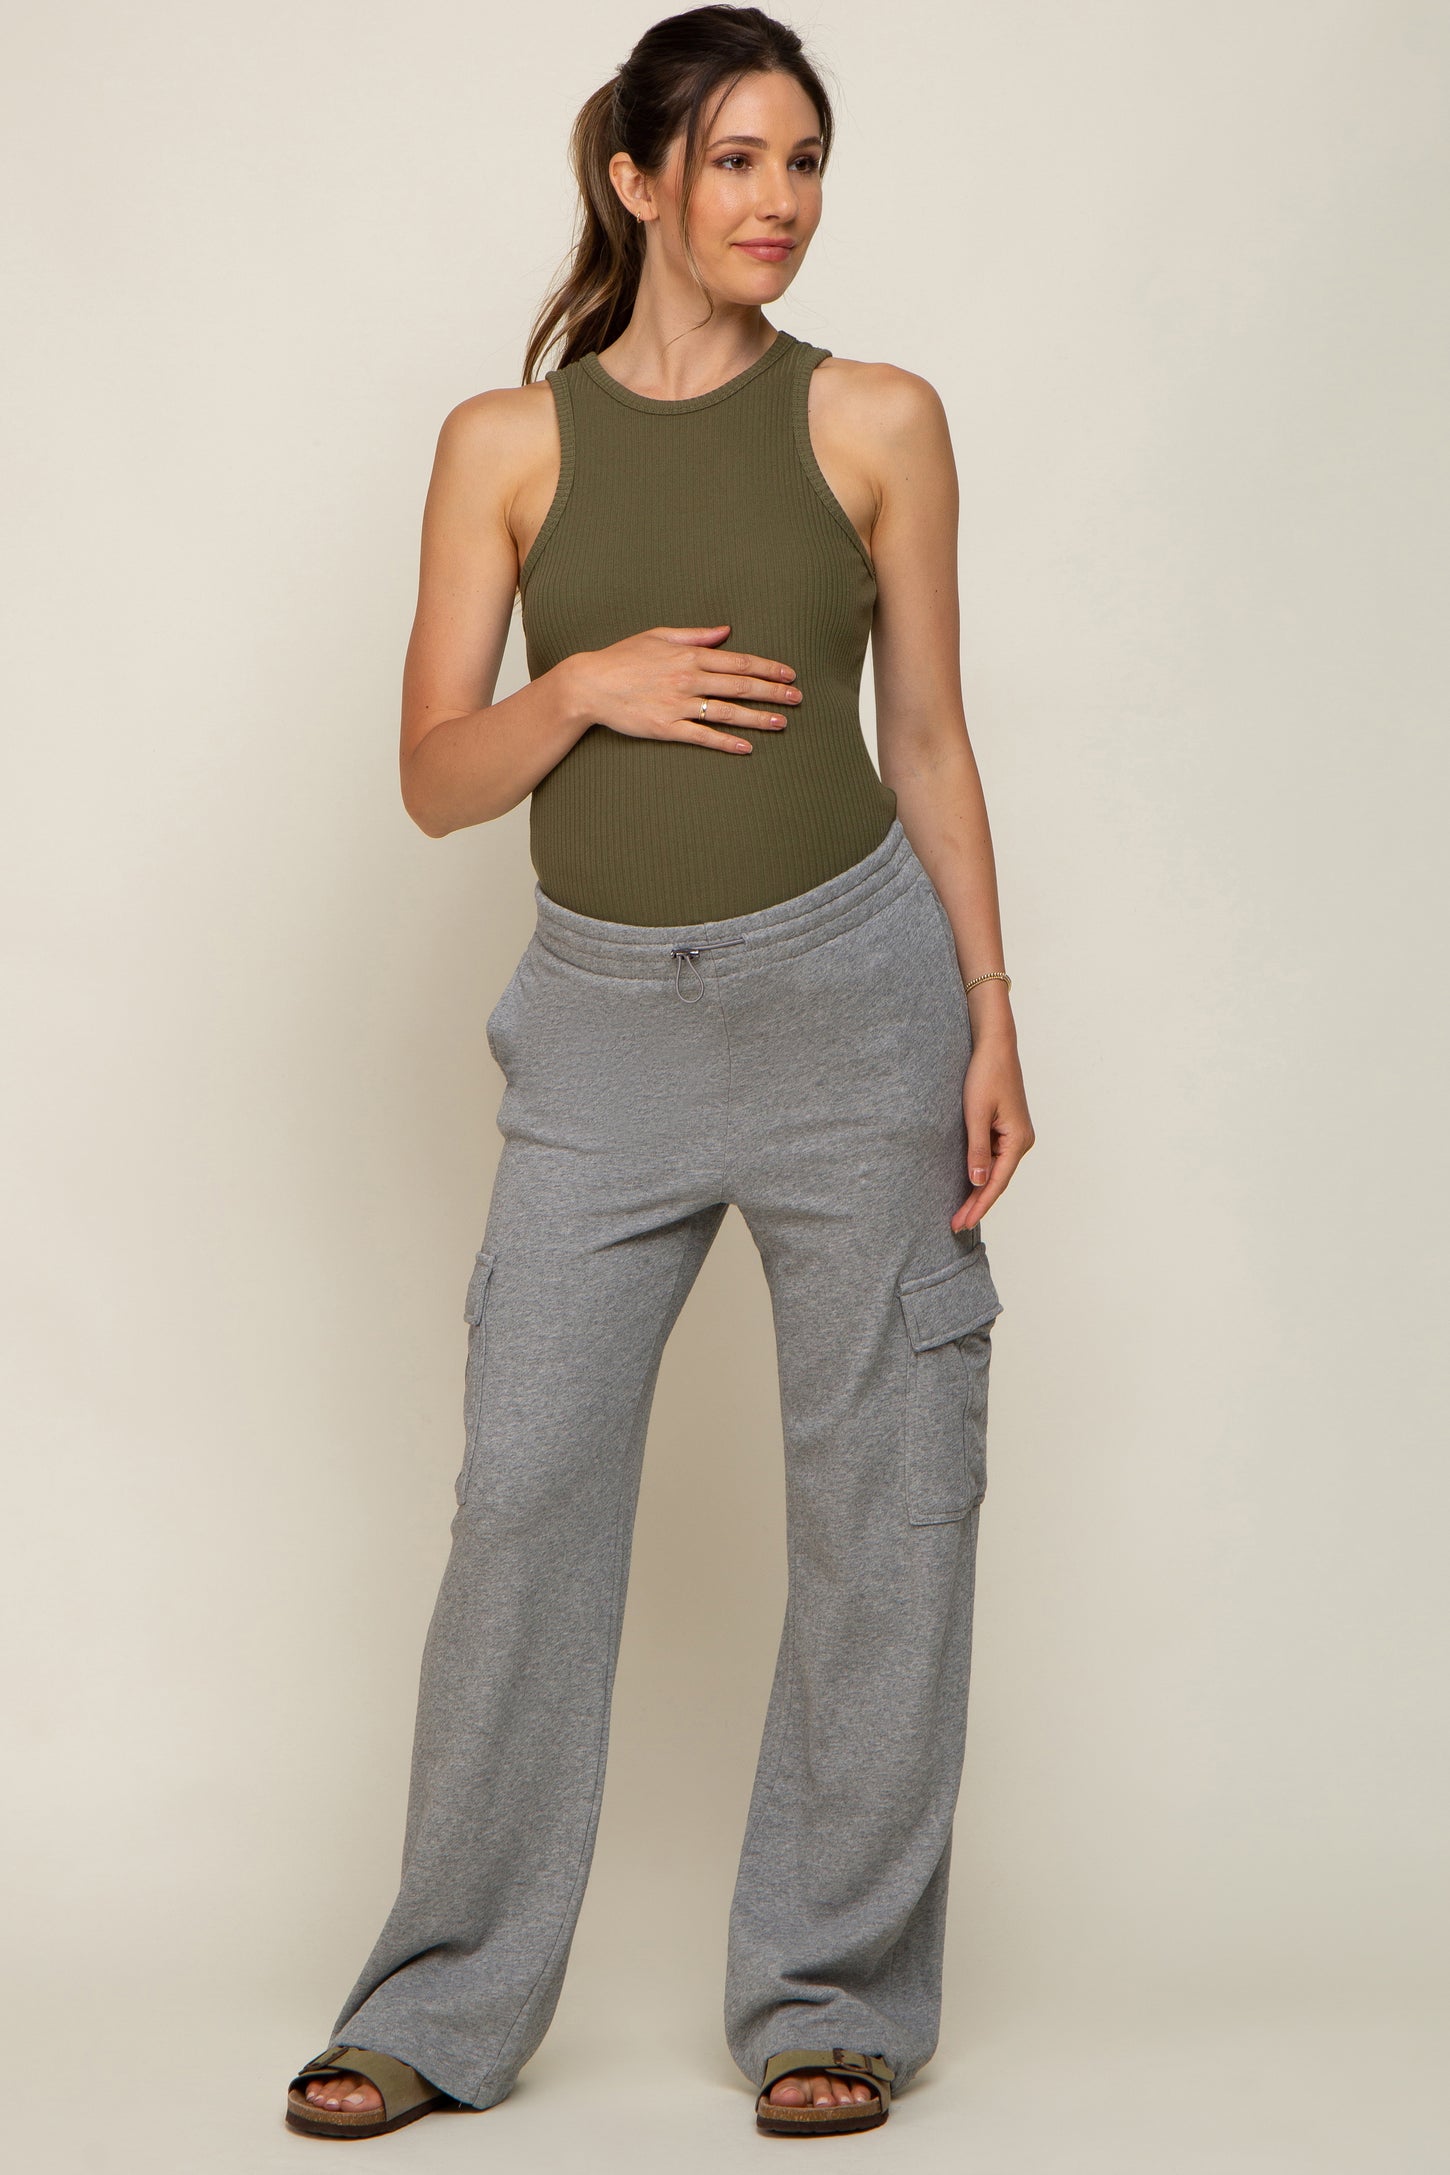 Soft Surroundings French Terry Cropped Pants for Women